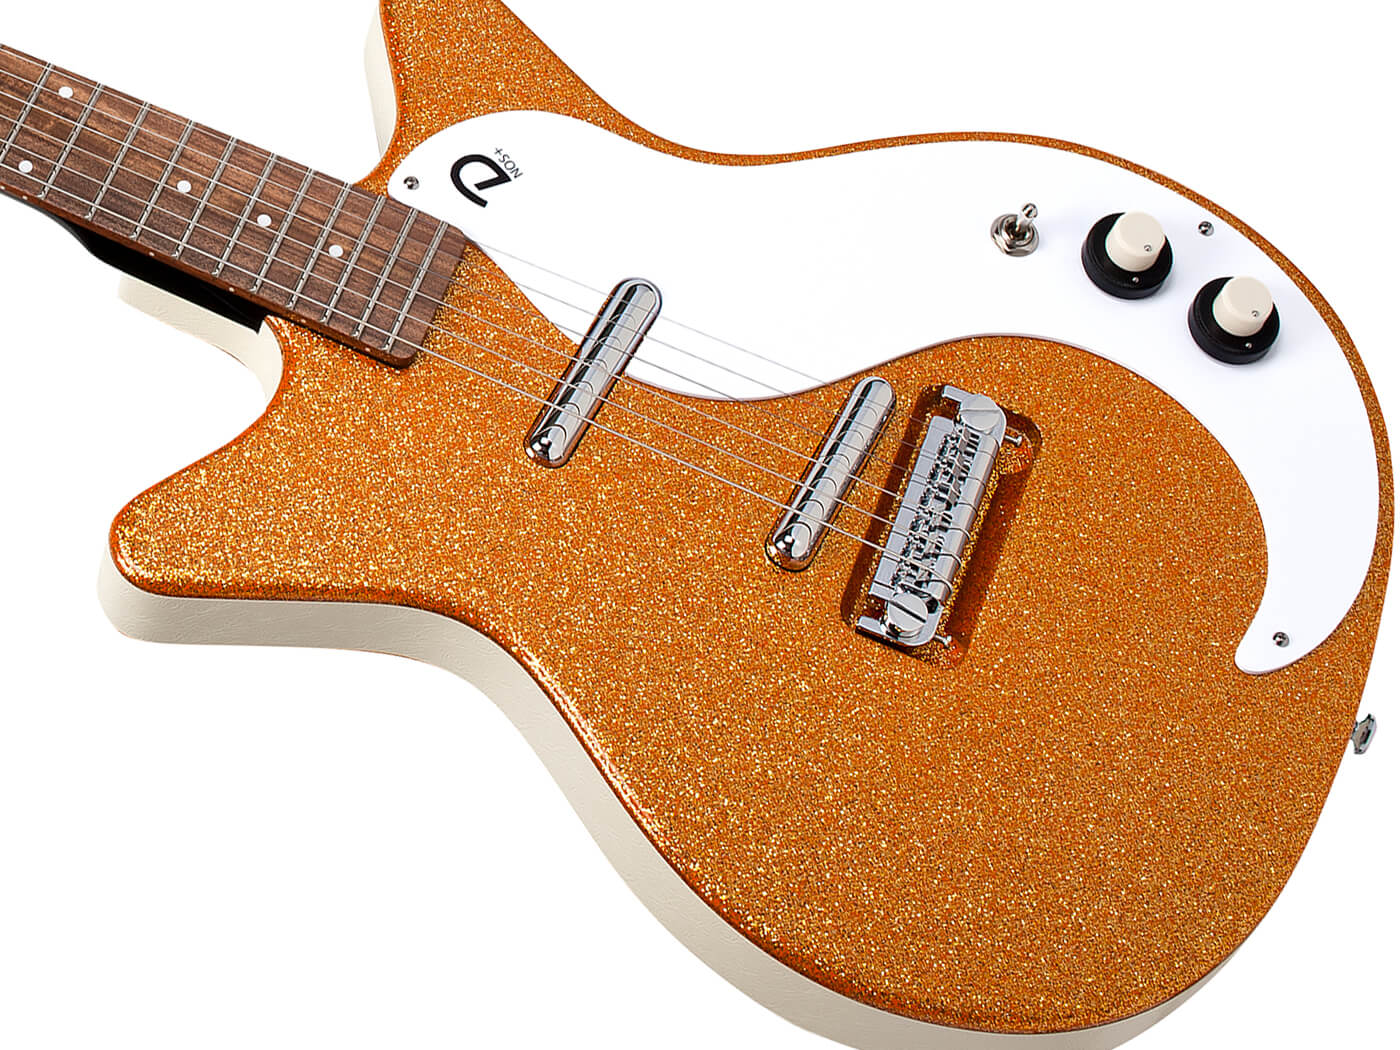 Danelectro unveils new flaked finishes for 60th Anniversary '59M NOS+